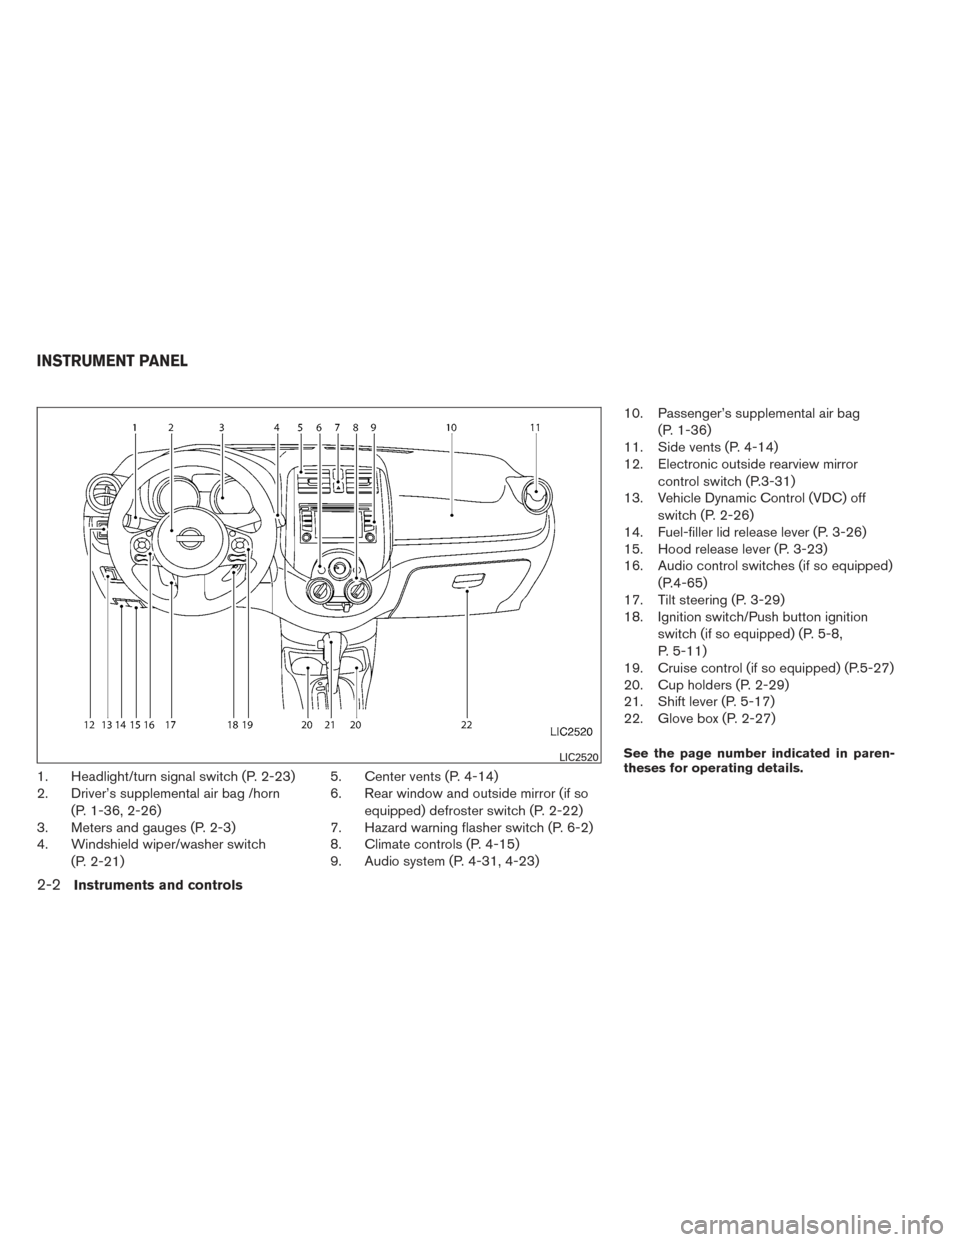 NISSAN VERSA SEDAN 2014 2.G Service Manual 1. Headlight/turn signal switch (P. 2-23)
2. Driver’s supplemental air bag /horn(P. 1-36, 2-26)
3. Meters and gauges (P. 2-3)
4. Windshield wiper/washer switch
(P. 2-21) 5. Center vents (P. 4-14)
6.